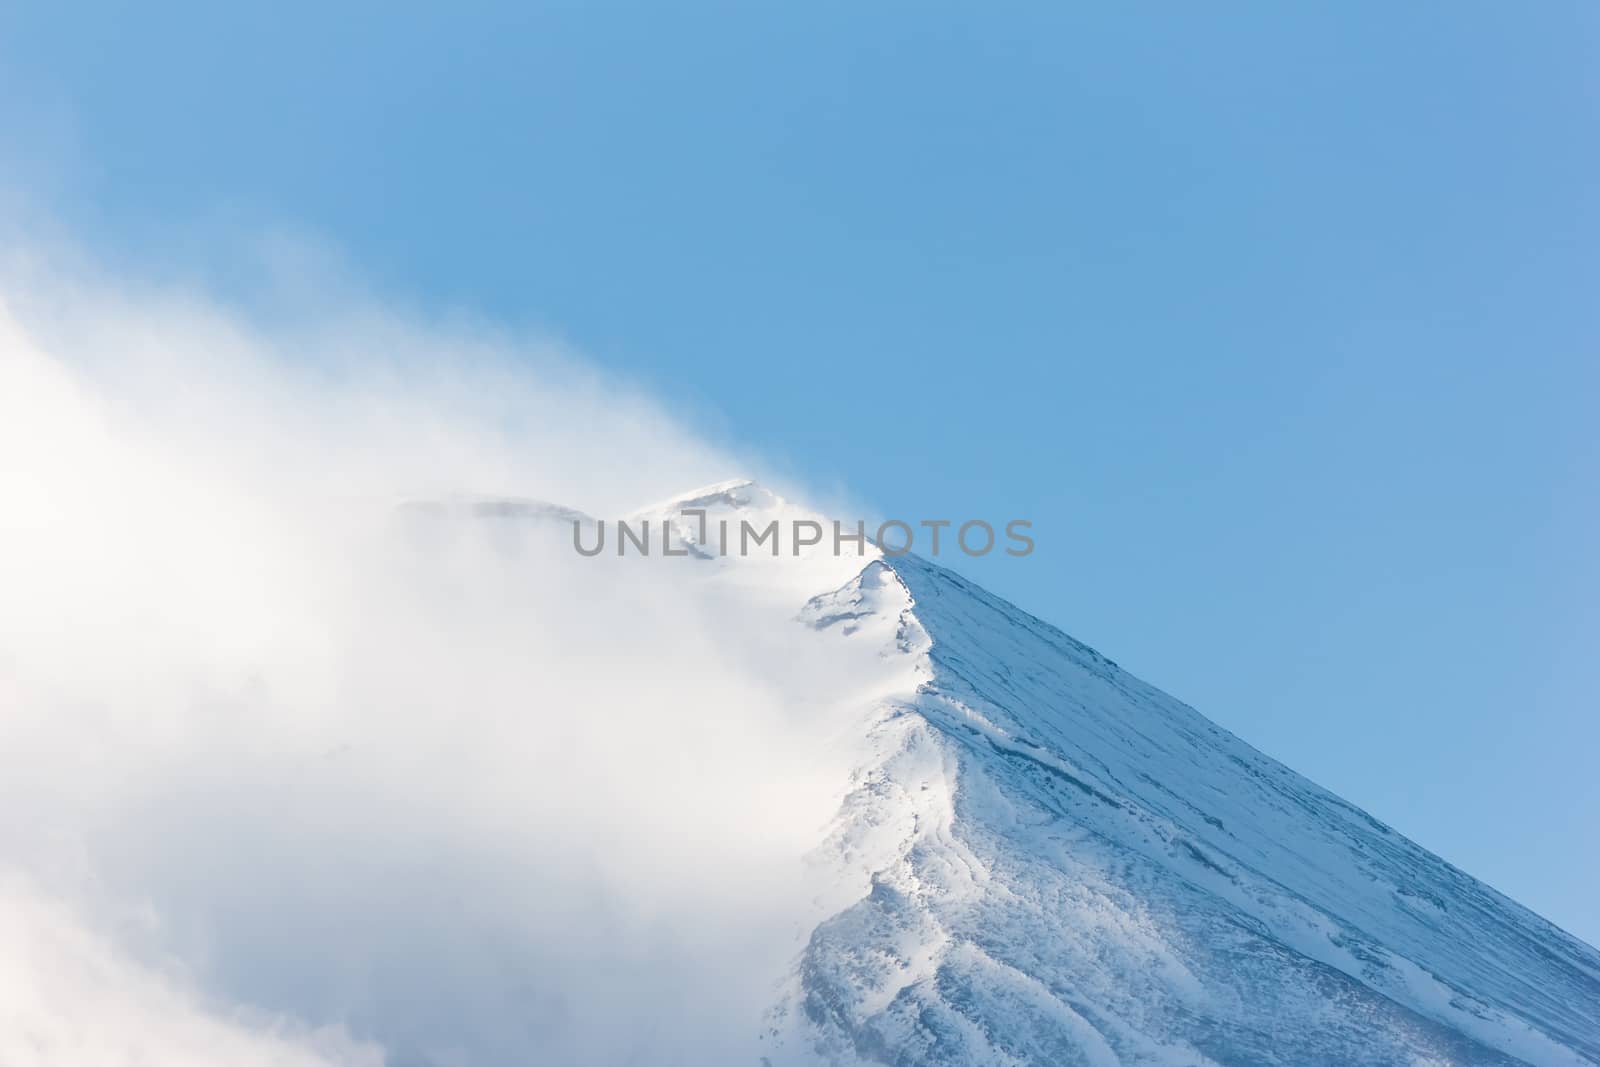 Peak of Fuji mountain with snow and cloud.